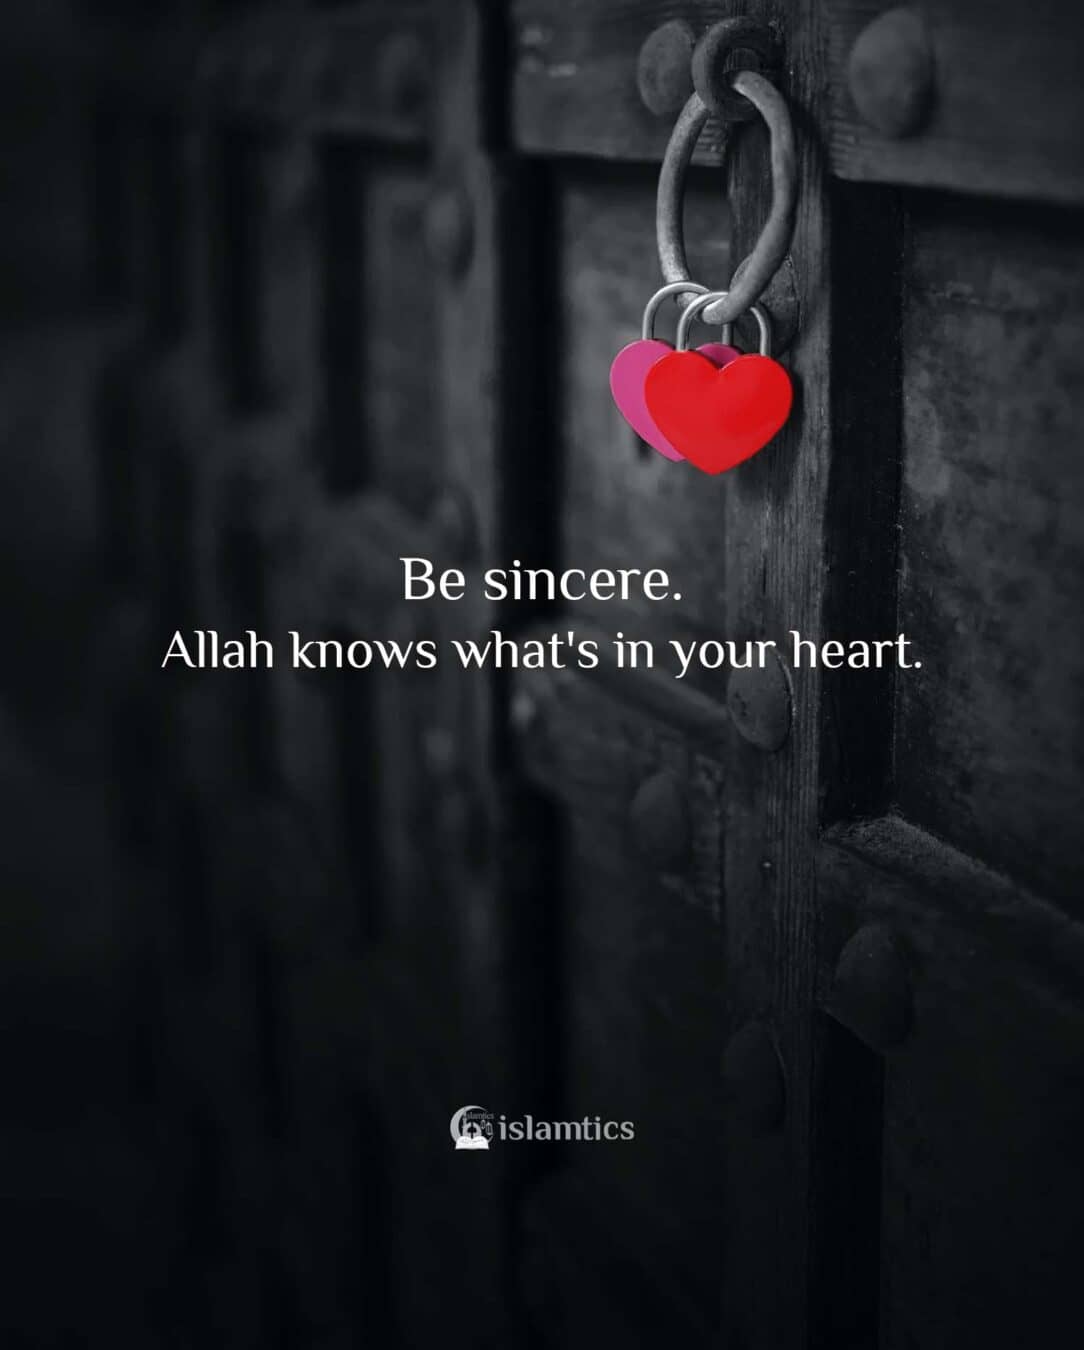 Be sincere. Allah knows what's in your heart.